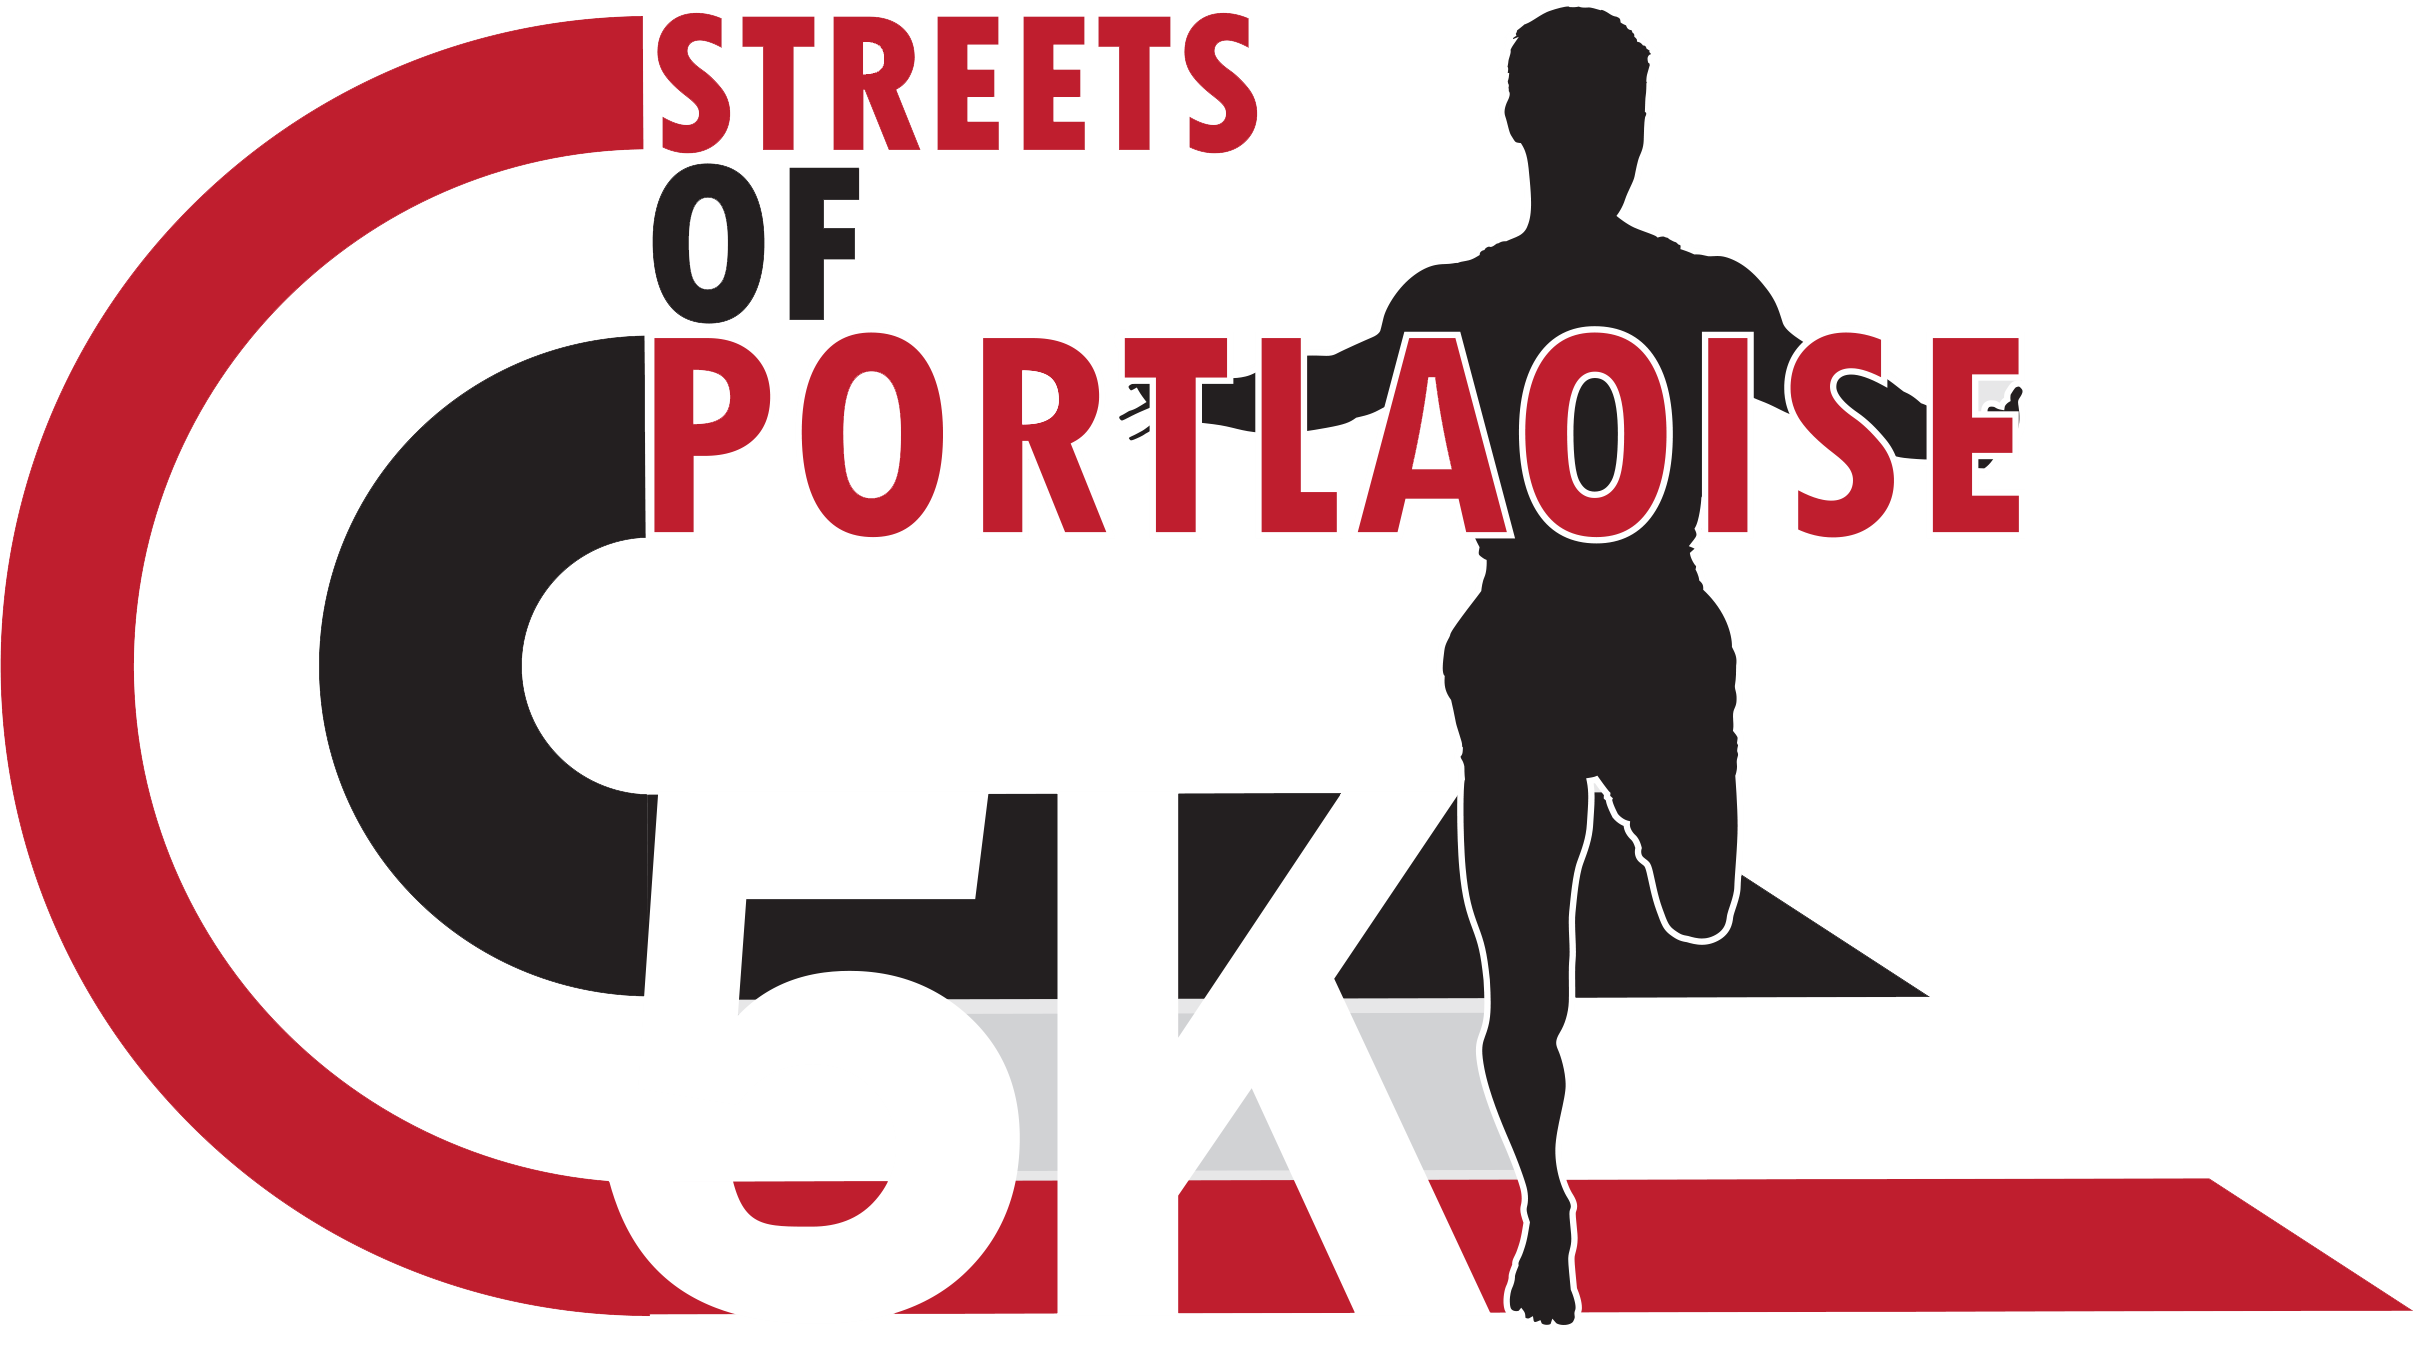 Streets of Portlaoise 5k 2017 Poster Amended